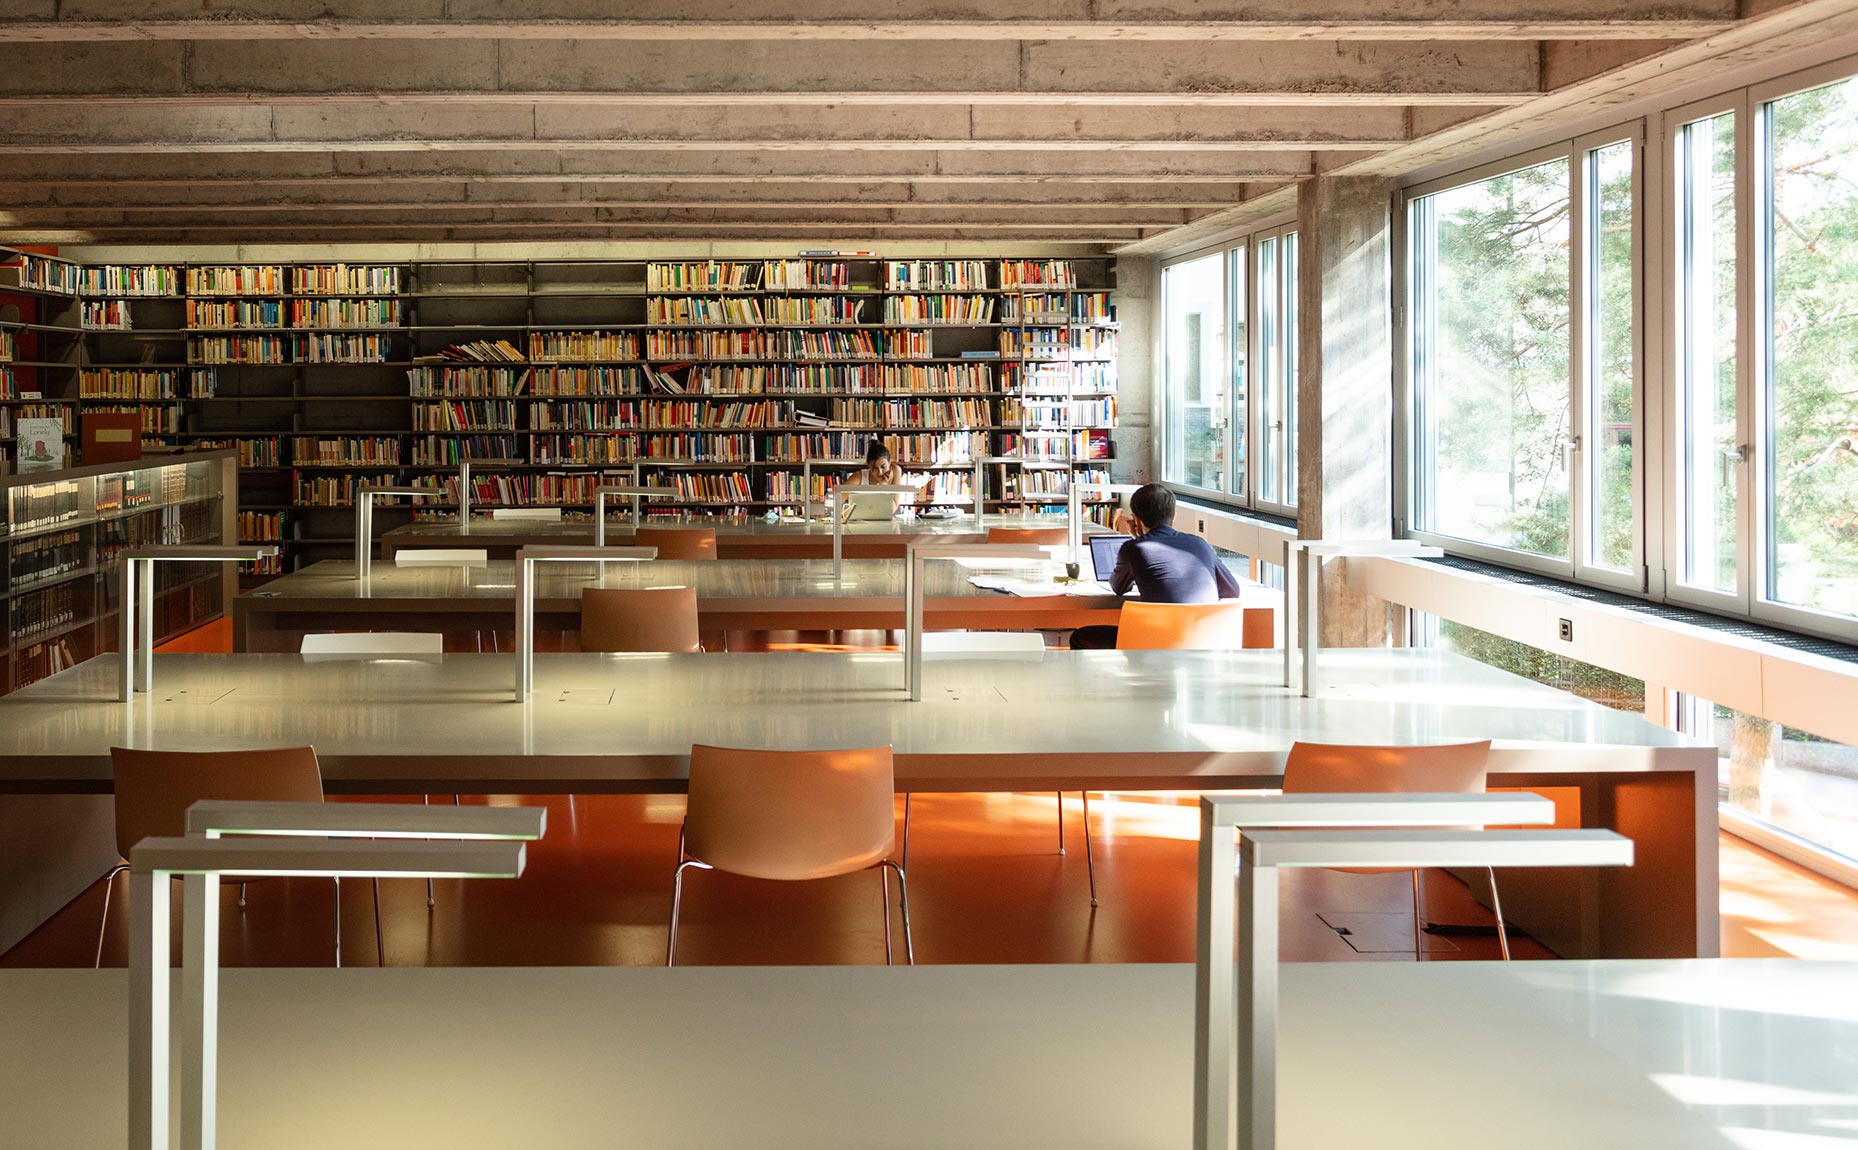 2022 – The new University Library unites all libraries under one organizational roof. (Pictured: University Library Educational Science)